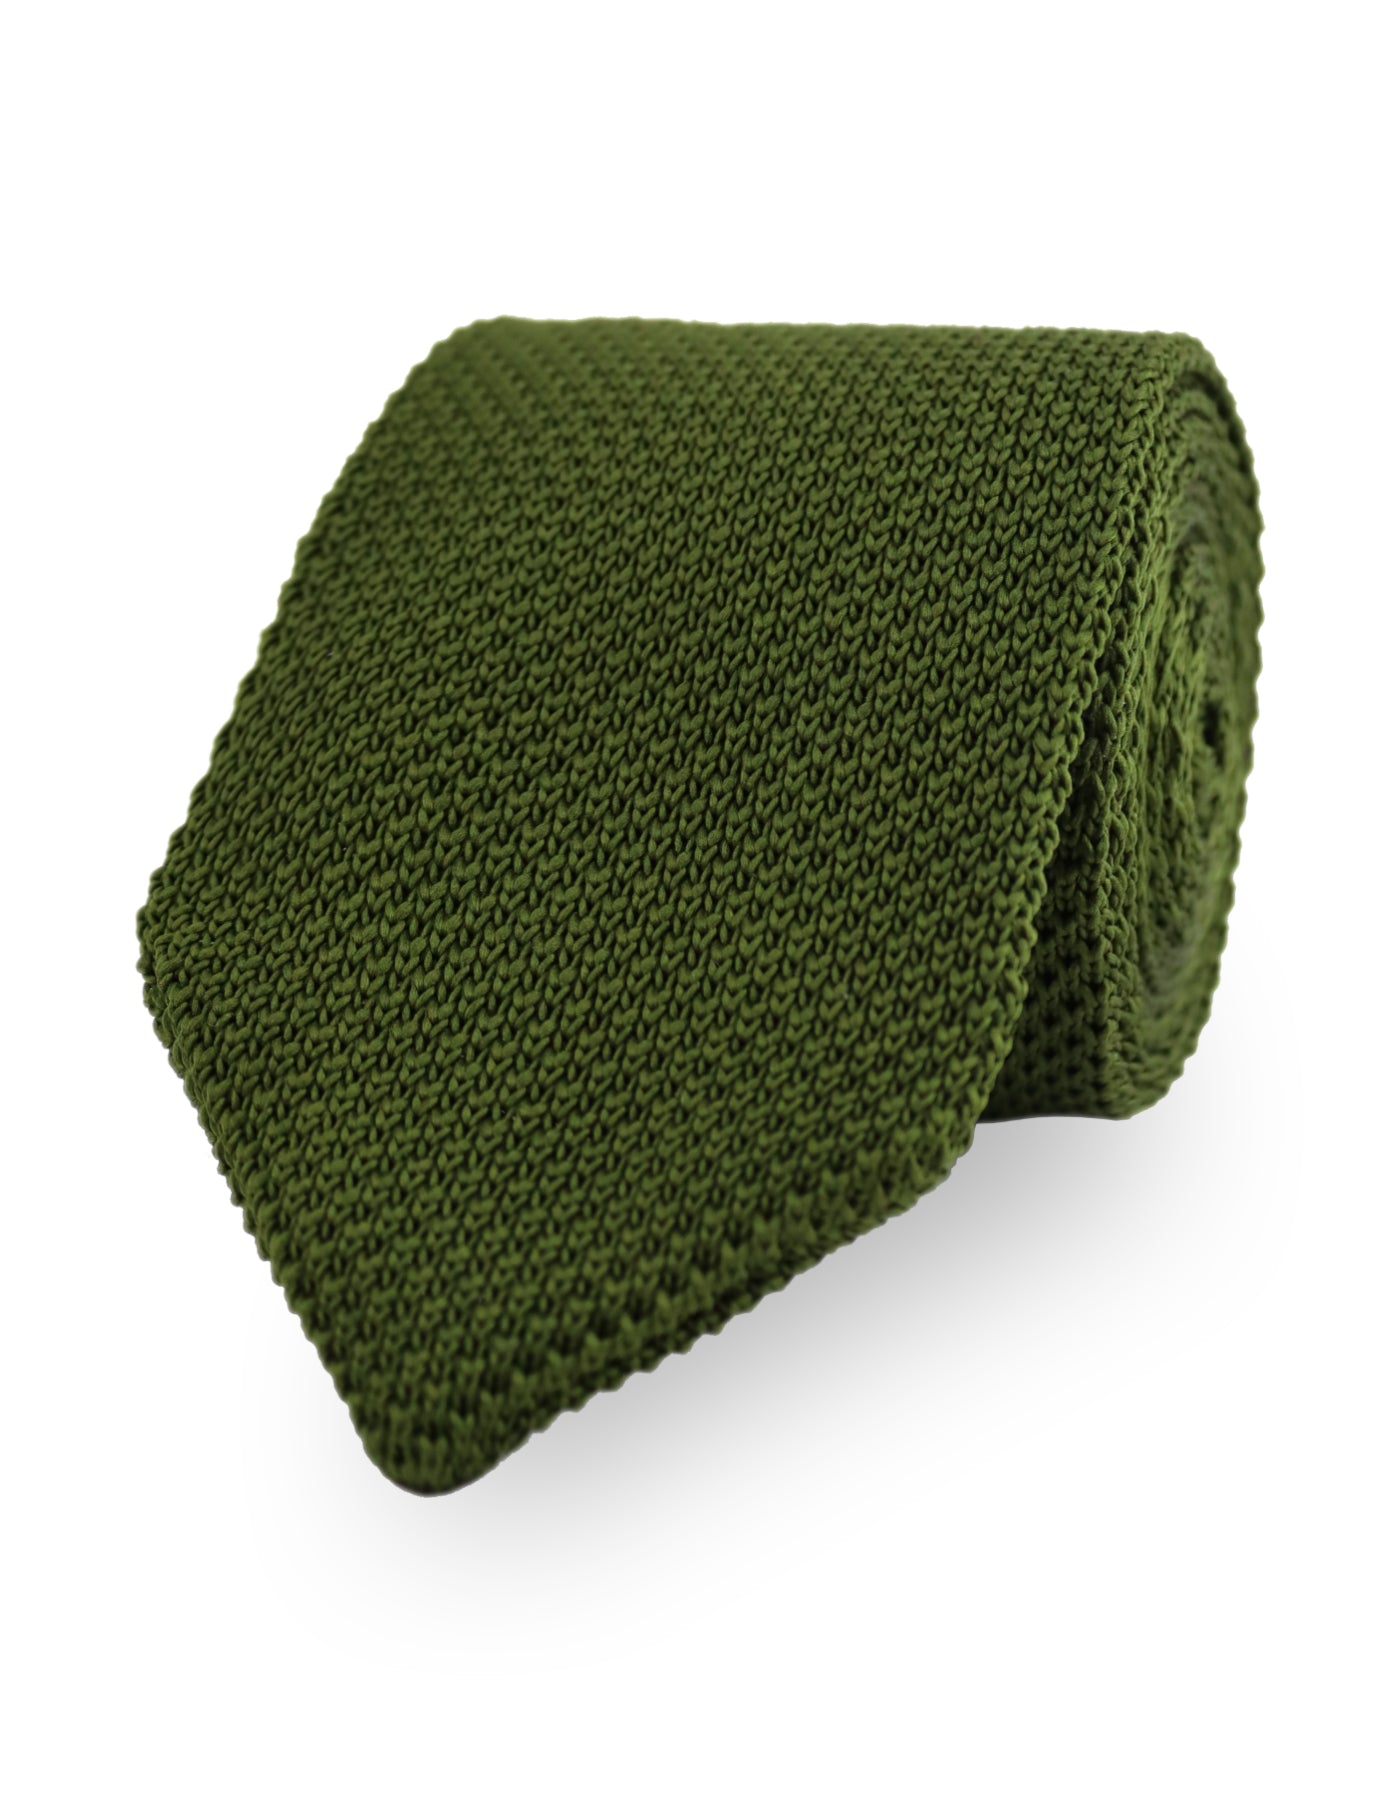 100% Polyester Square End Knitted Tie - Olive Green